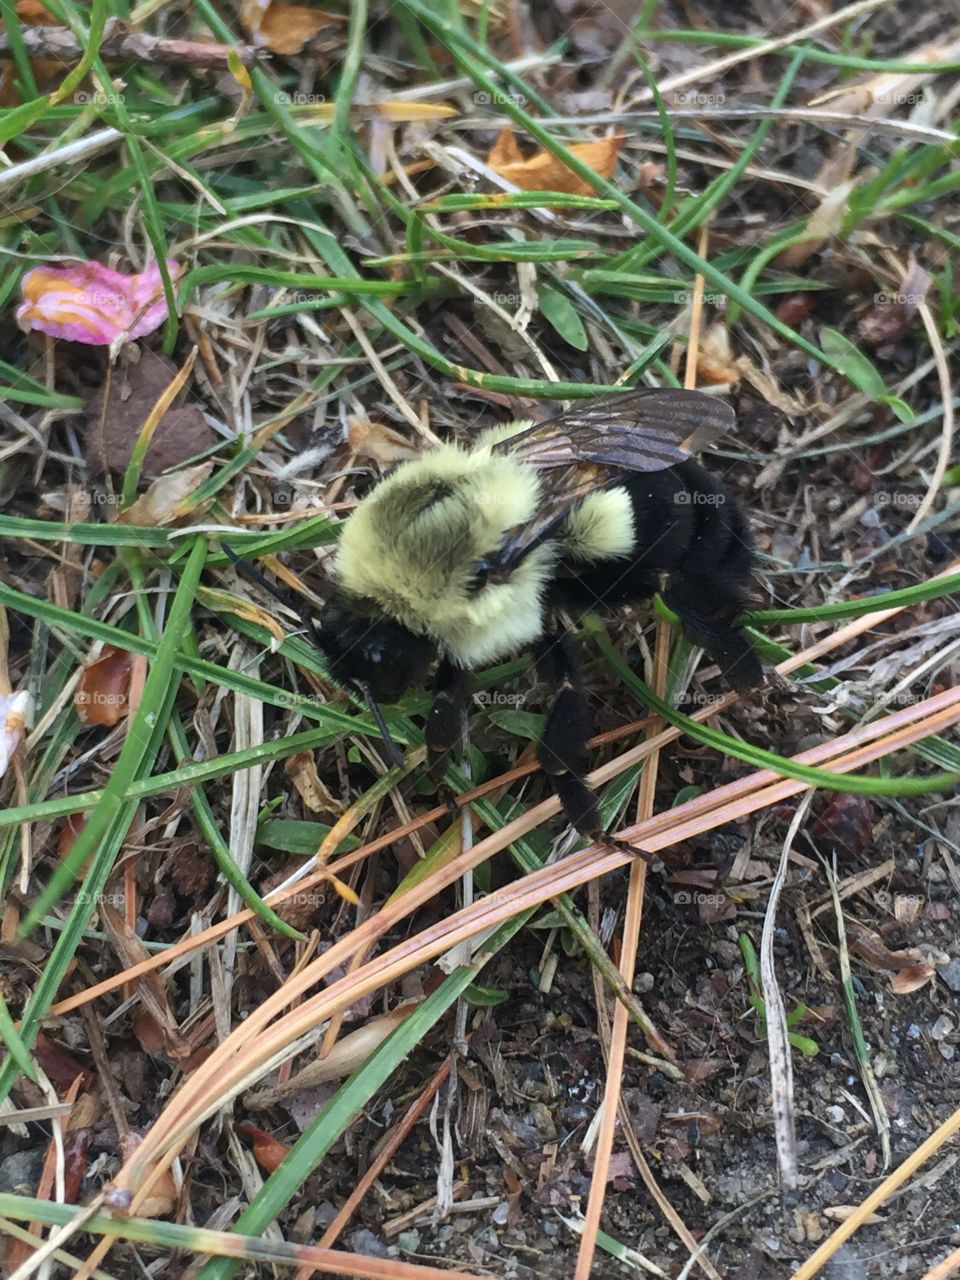 Bumble bee in grass 